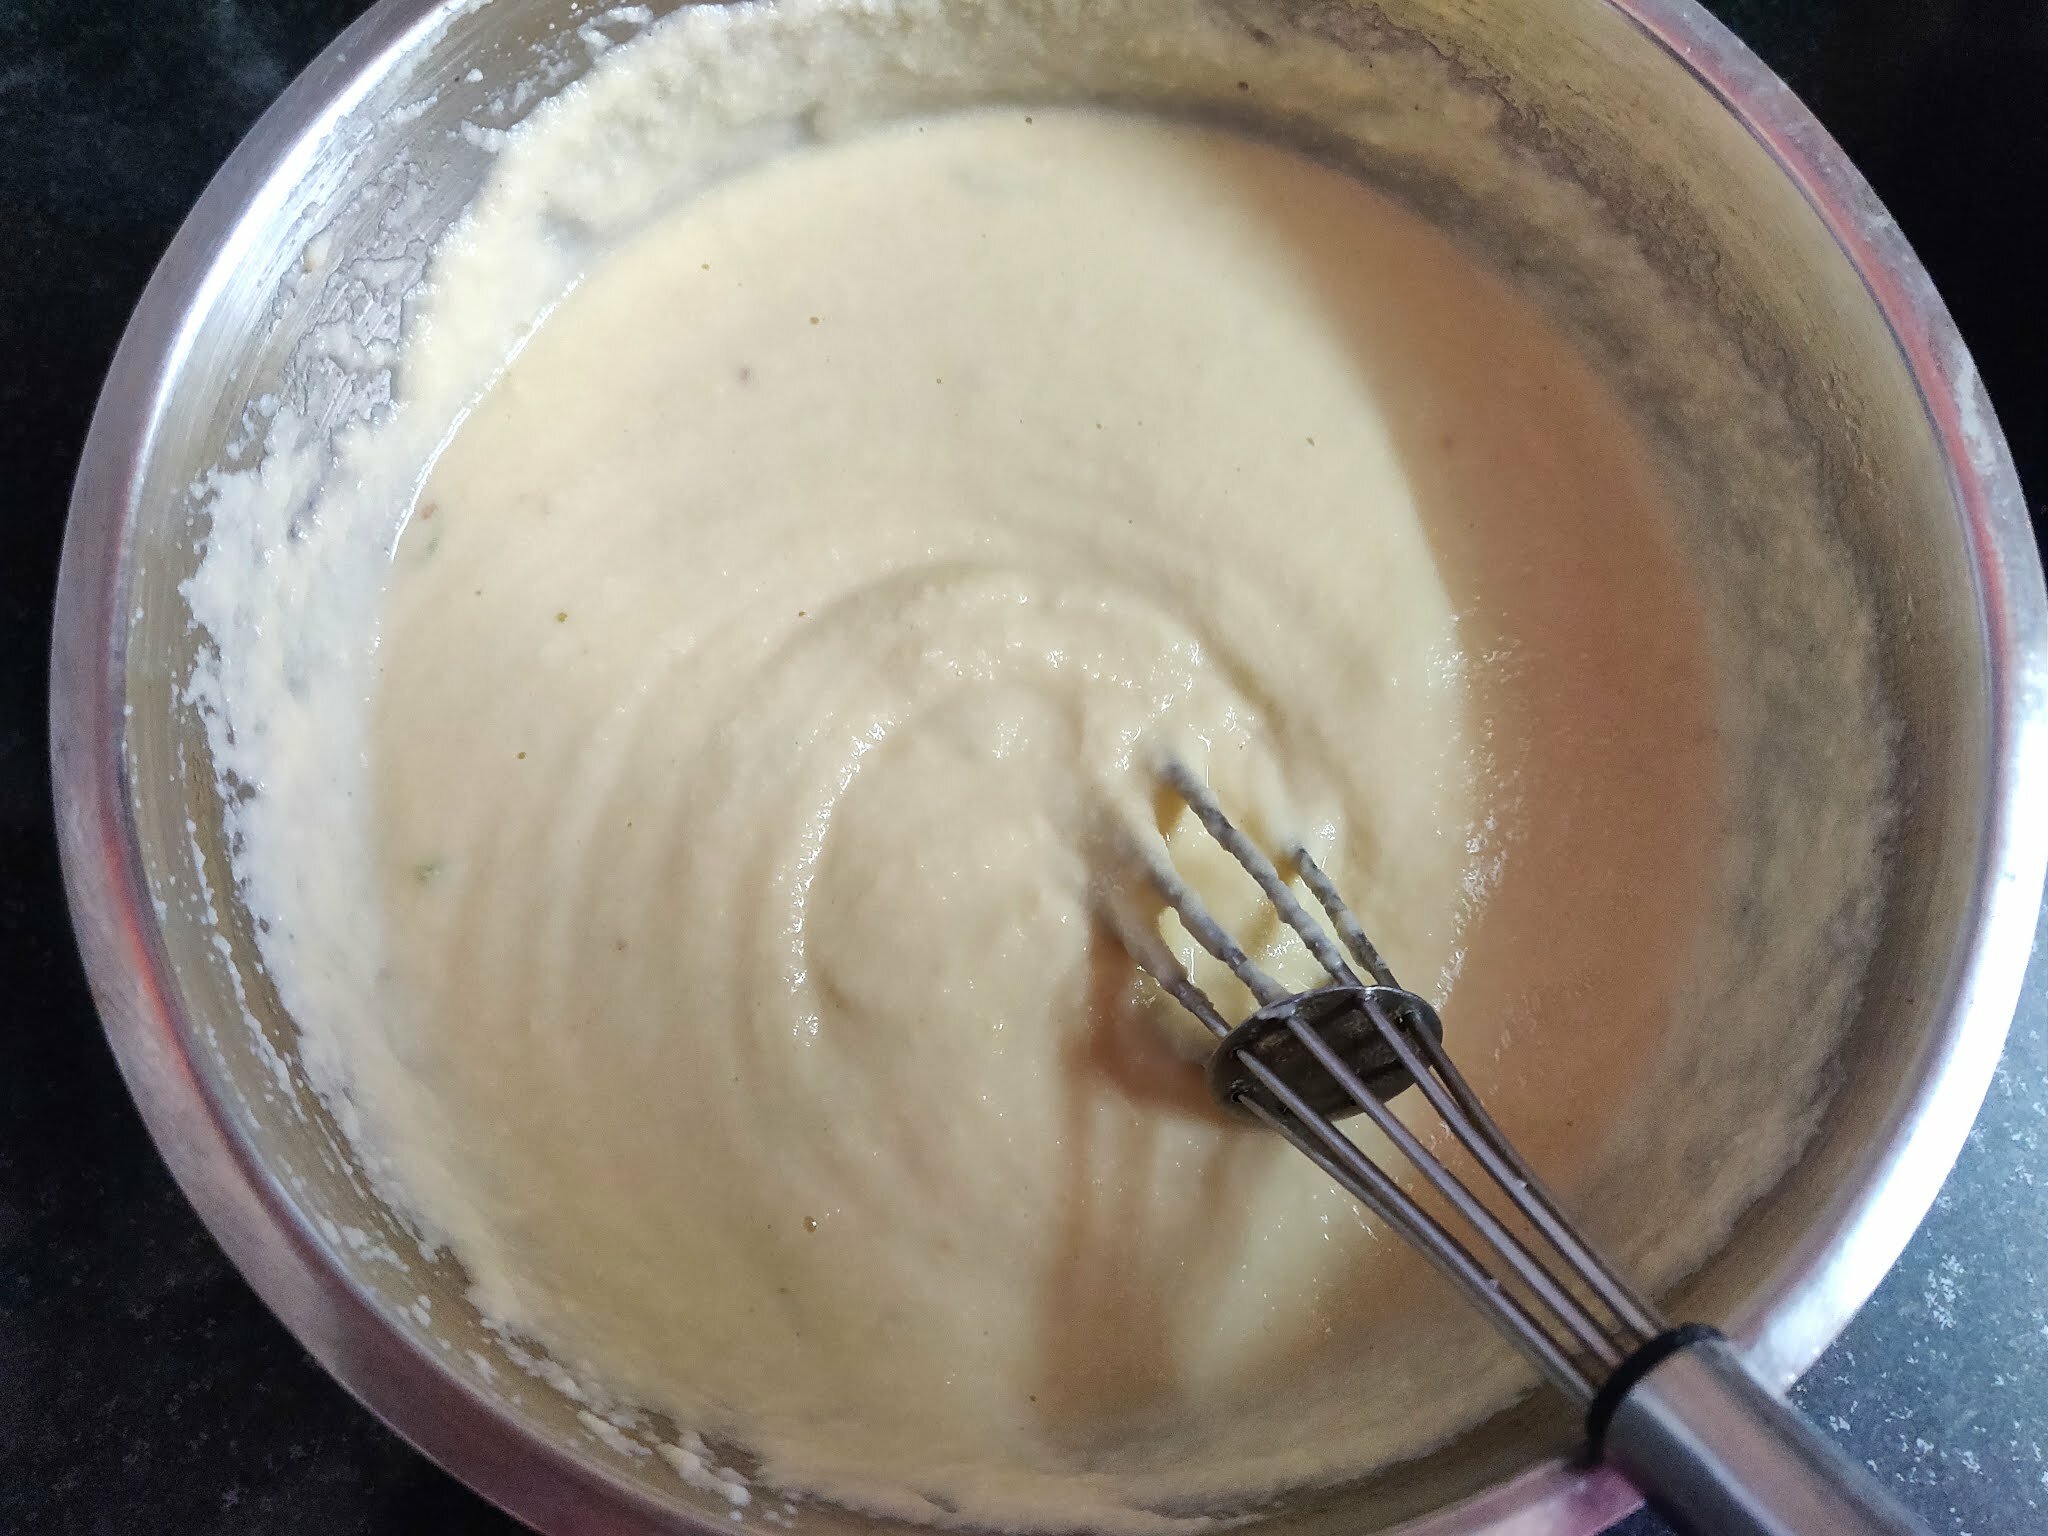 Whisking batter to aerate it.